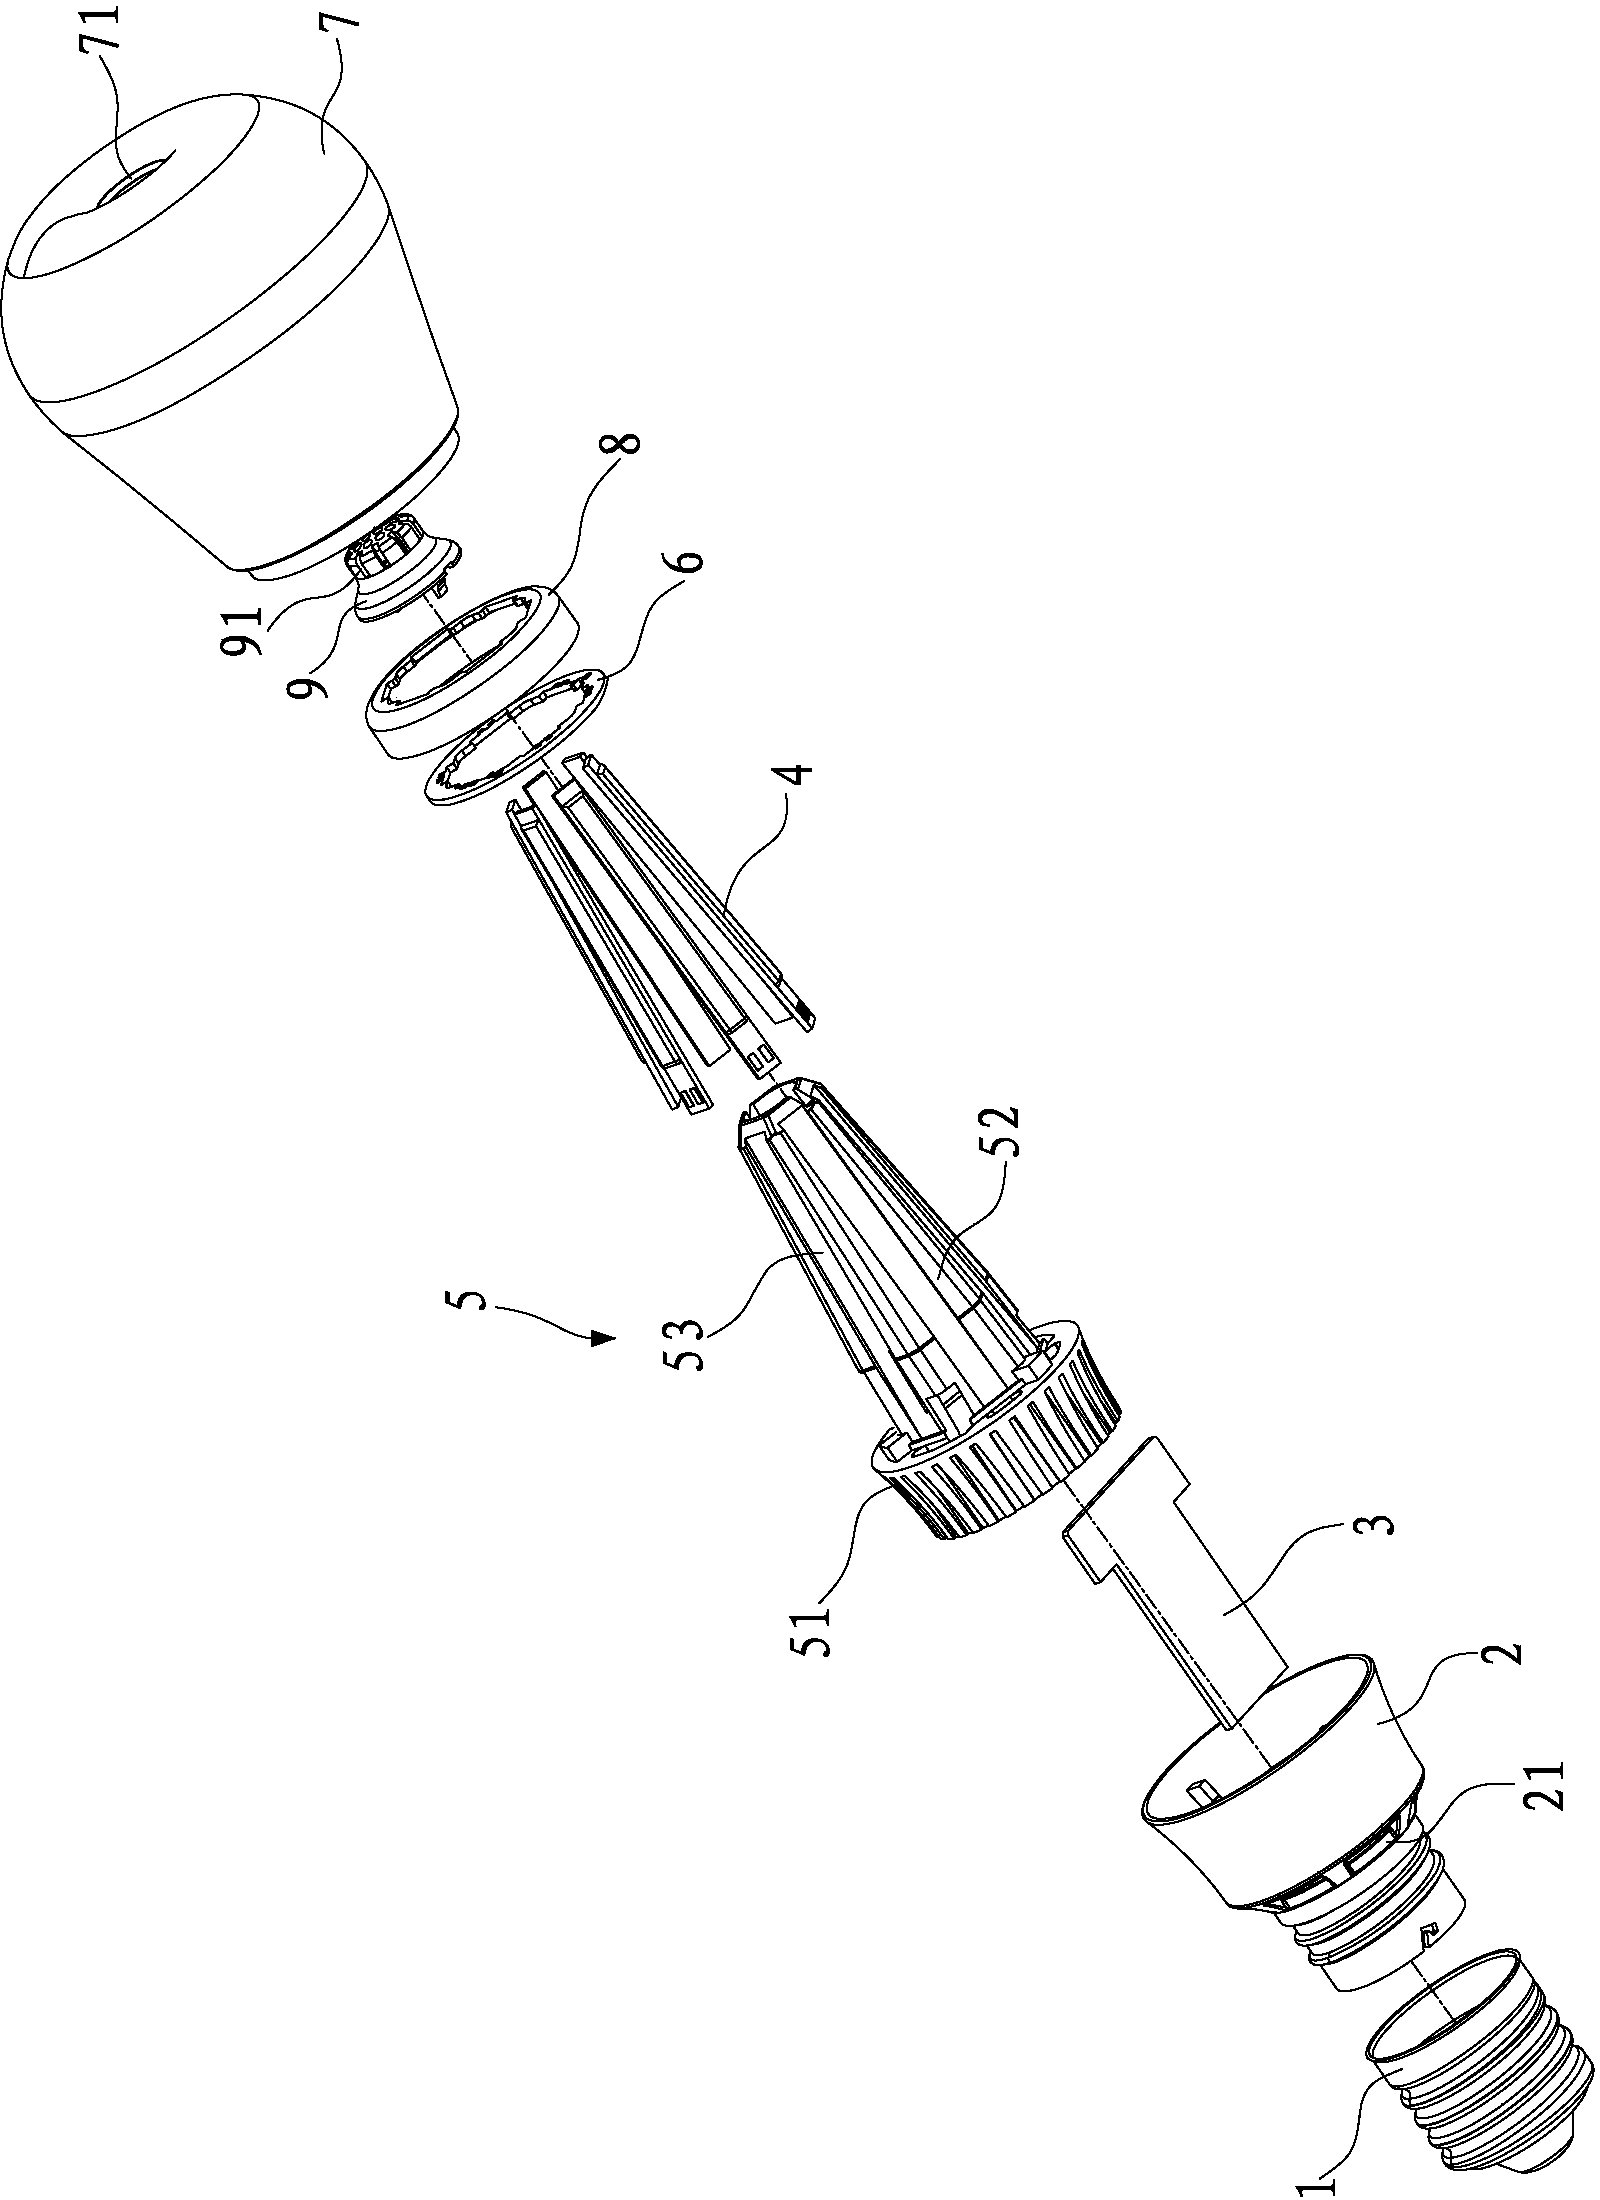 Bulb lamp structure